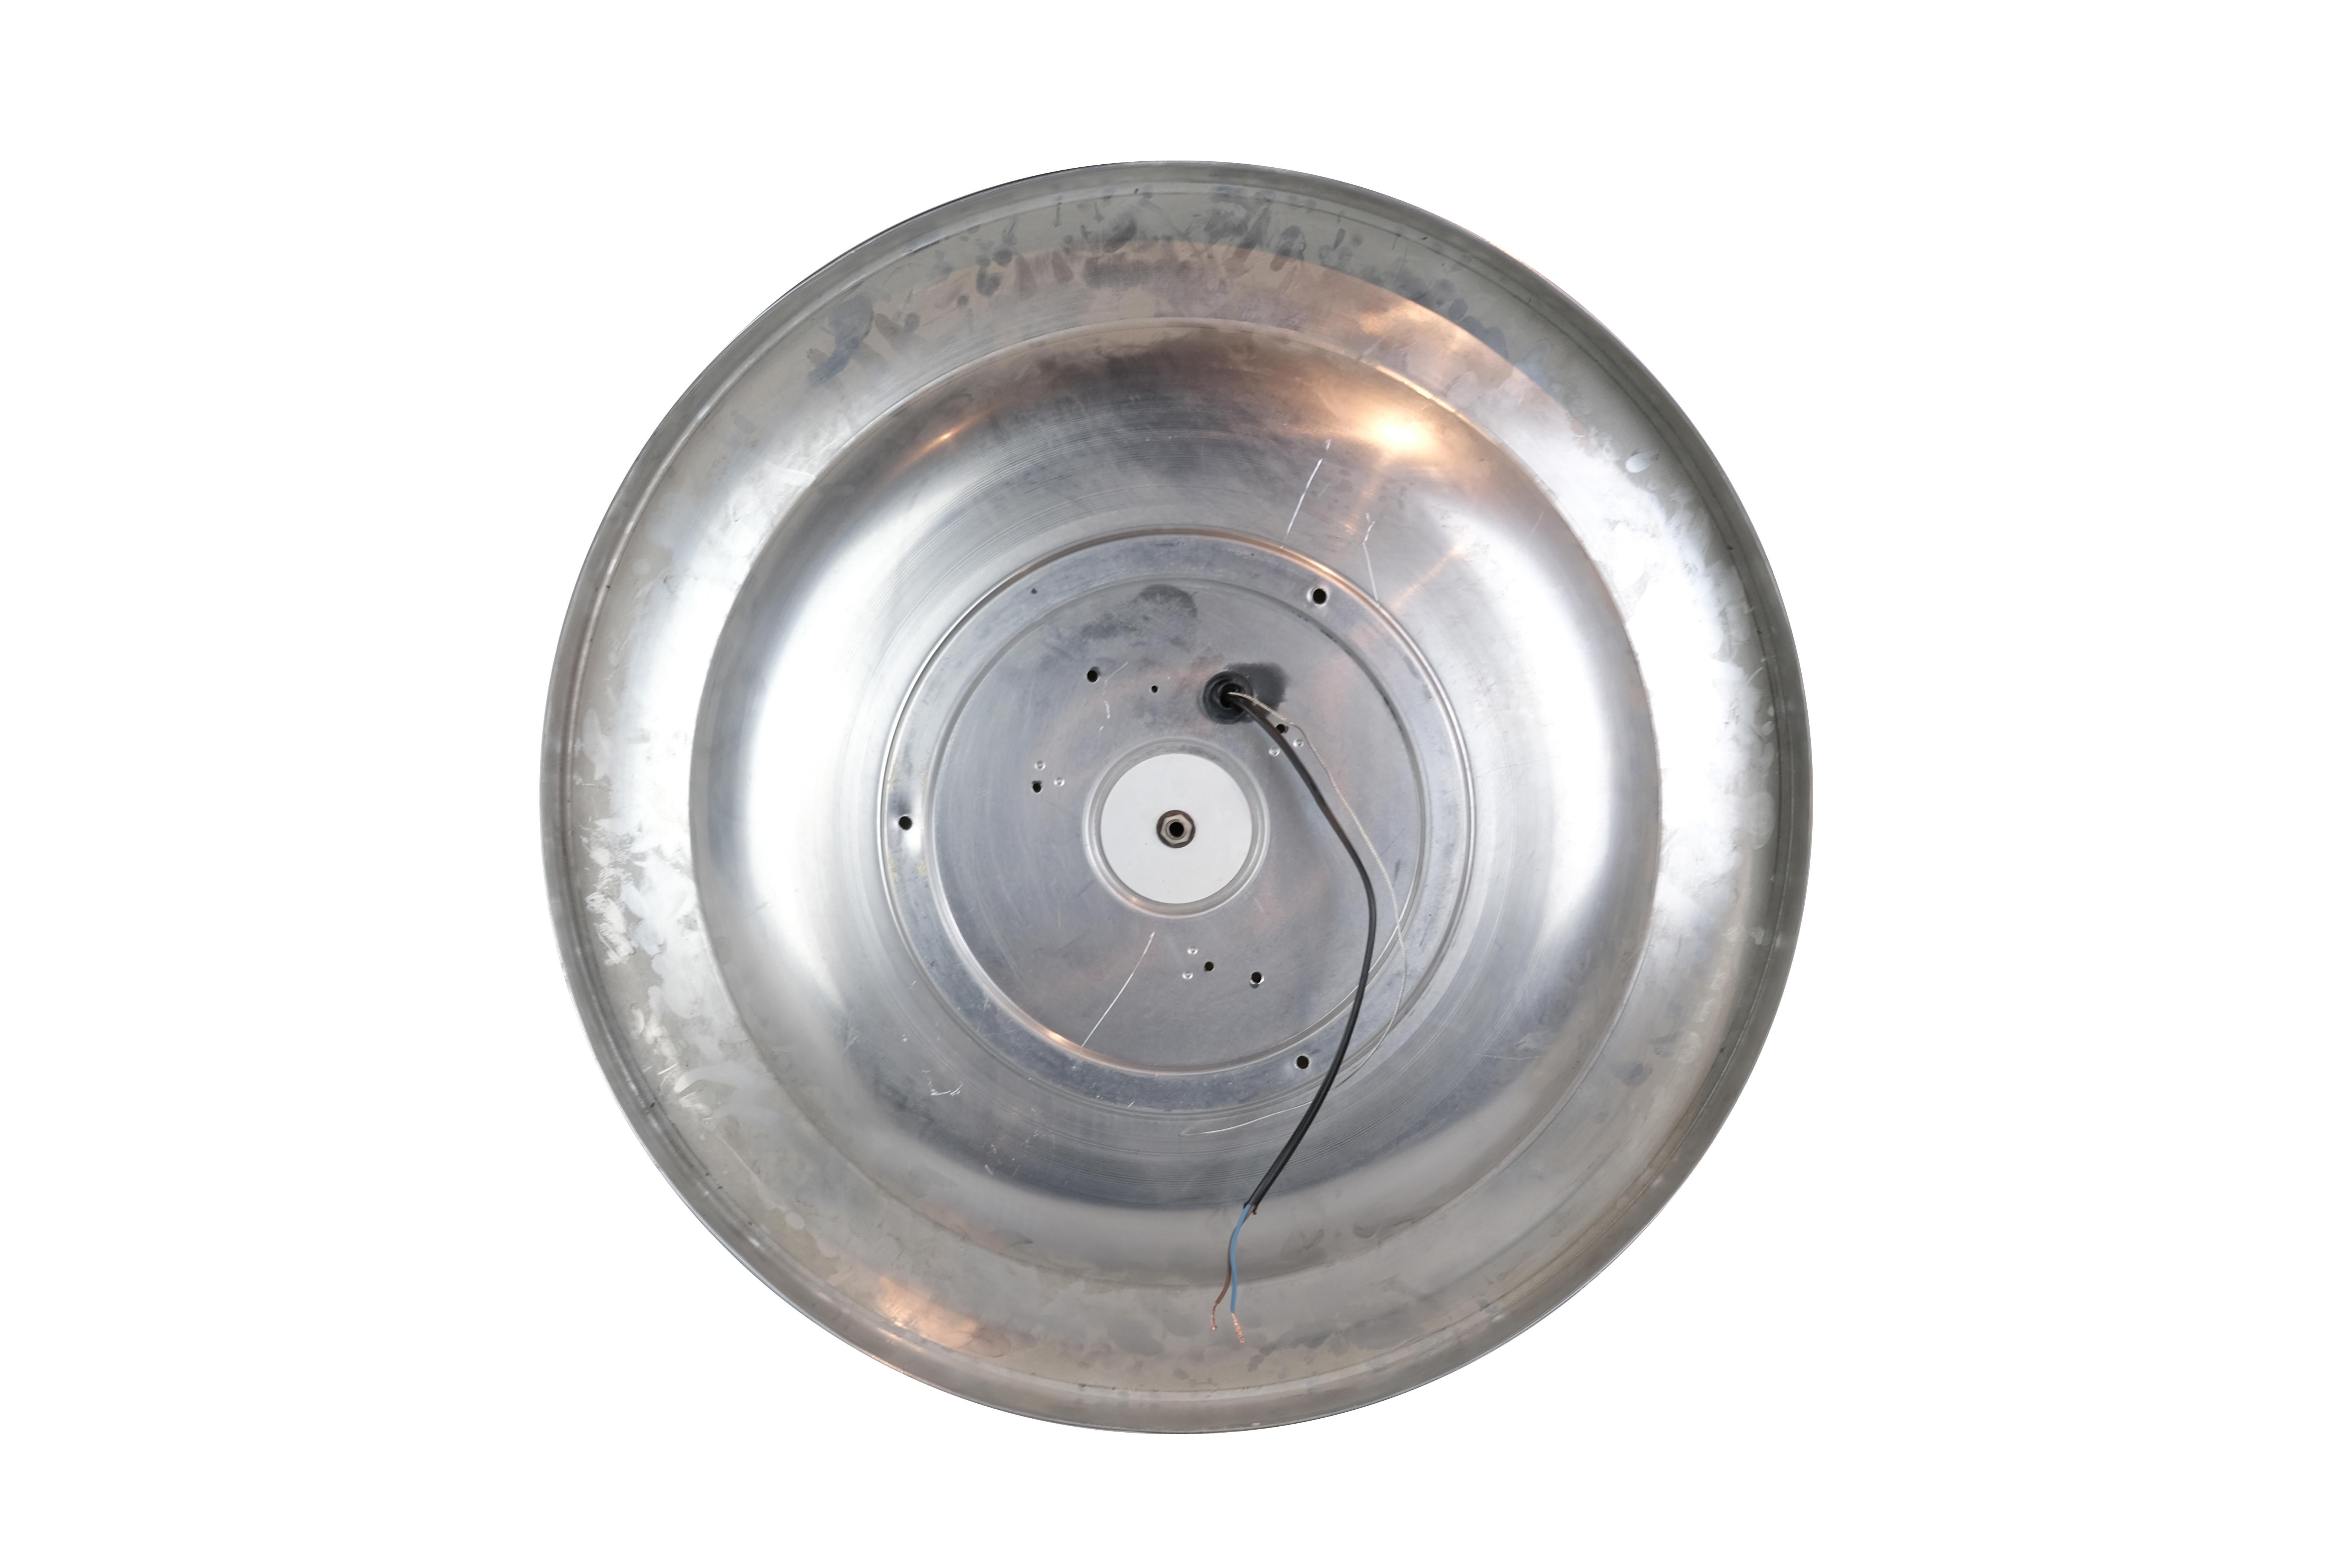 A large French round disk ceiling light with molded geometric designed glass and a brass rim. Four sockets. Sticker residue on brass rim will be removed.